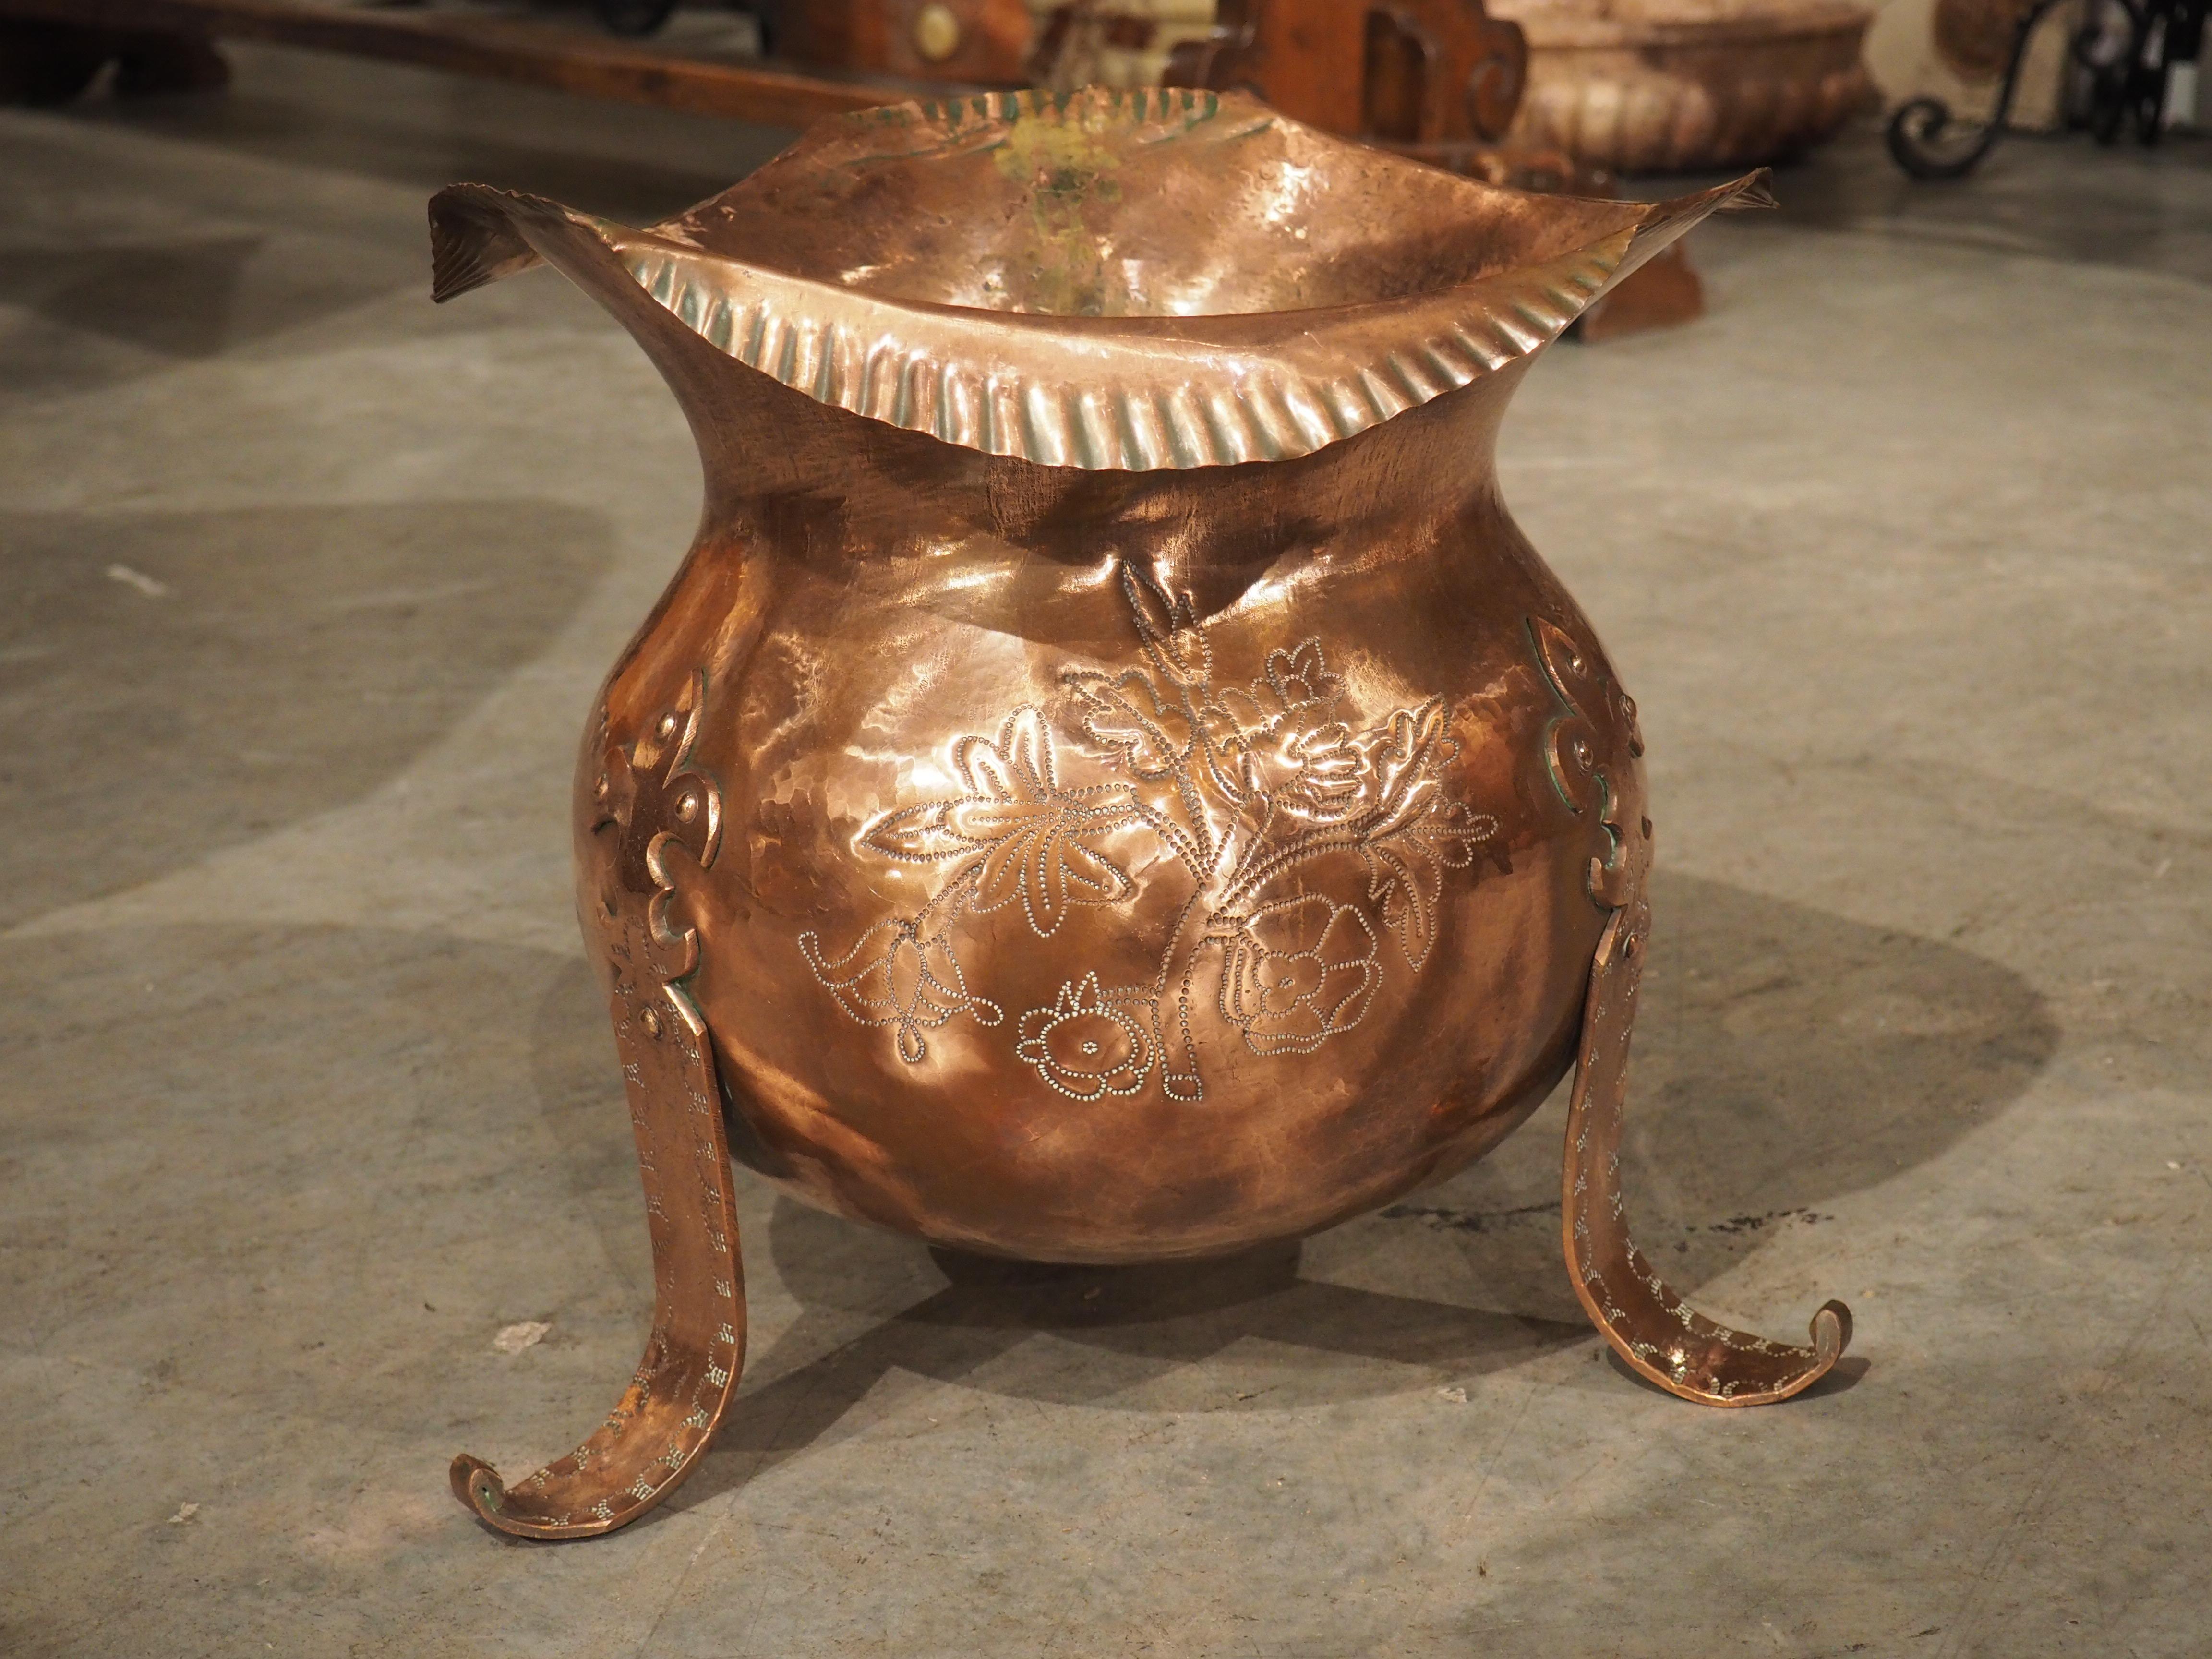 Hammered Early 1900s French Copper Cachepot Jardiniere with Scalloped Rim For Sale